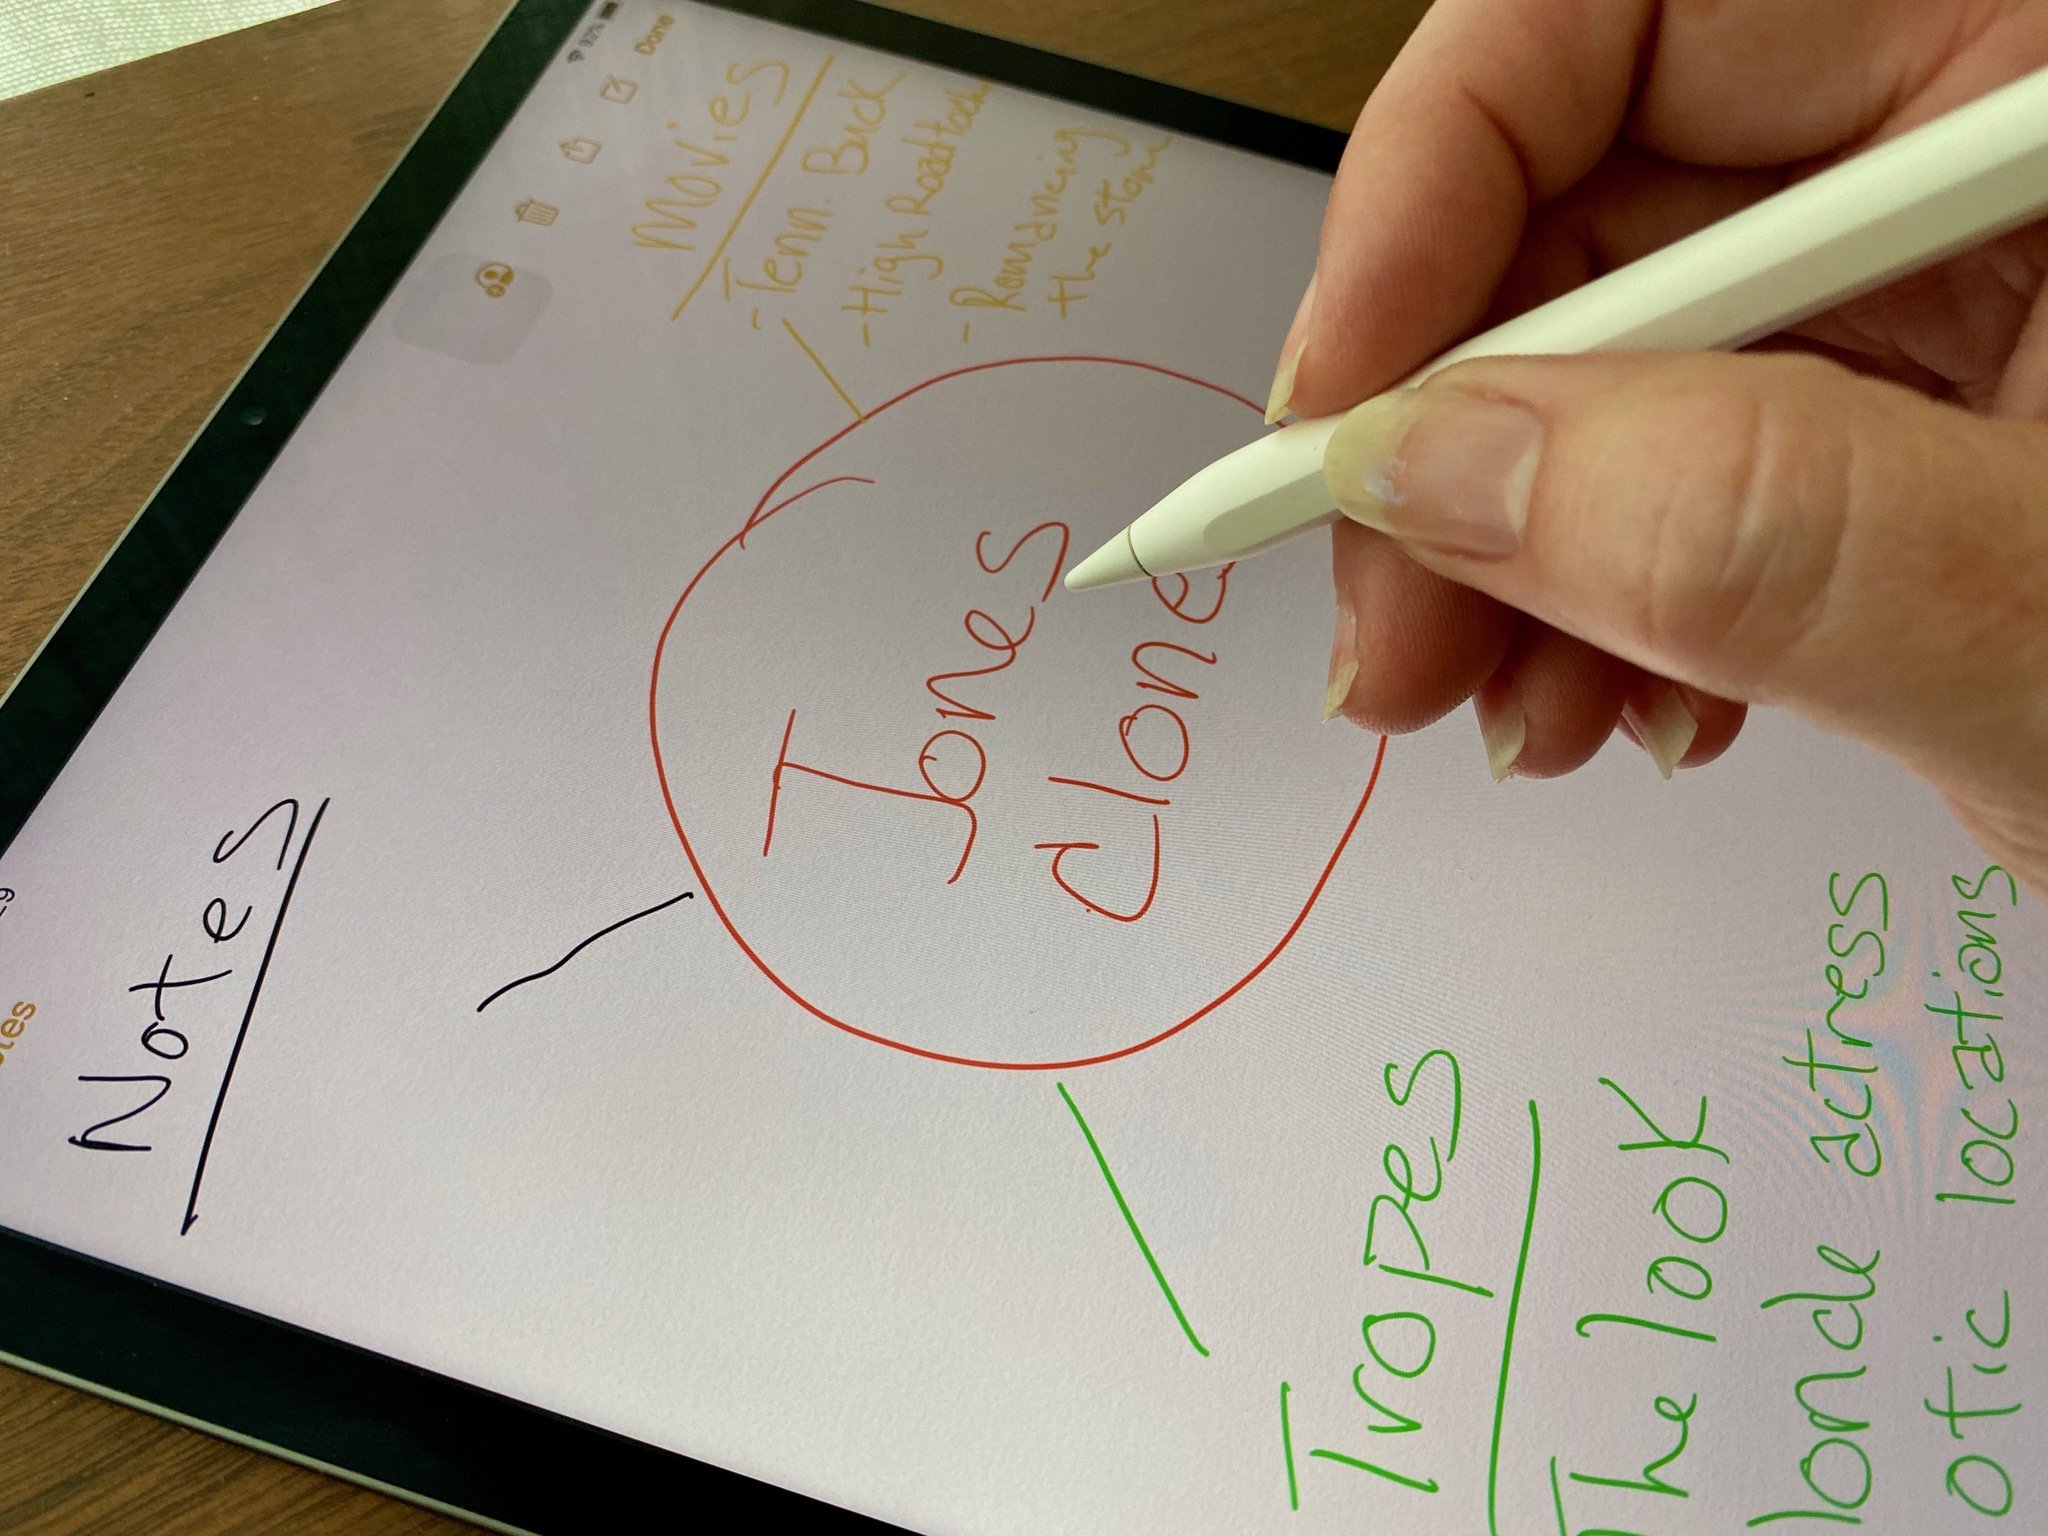 Easy methods to add photographs, movies, scans, and sketches to Notes on iPhone and iPad